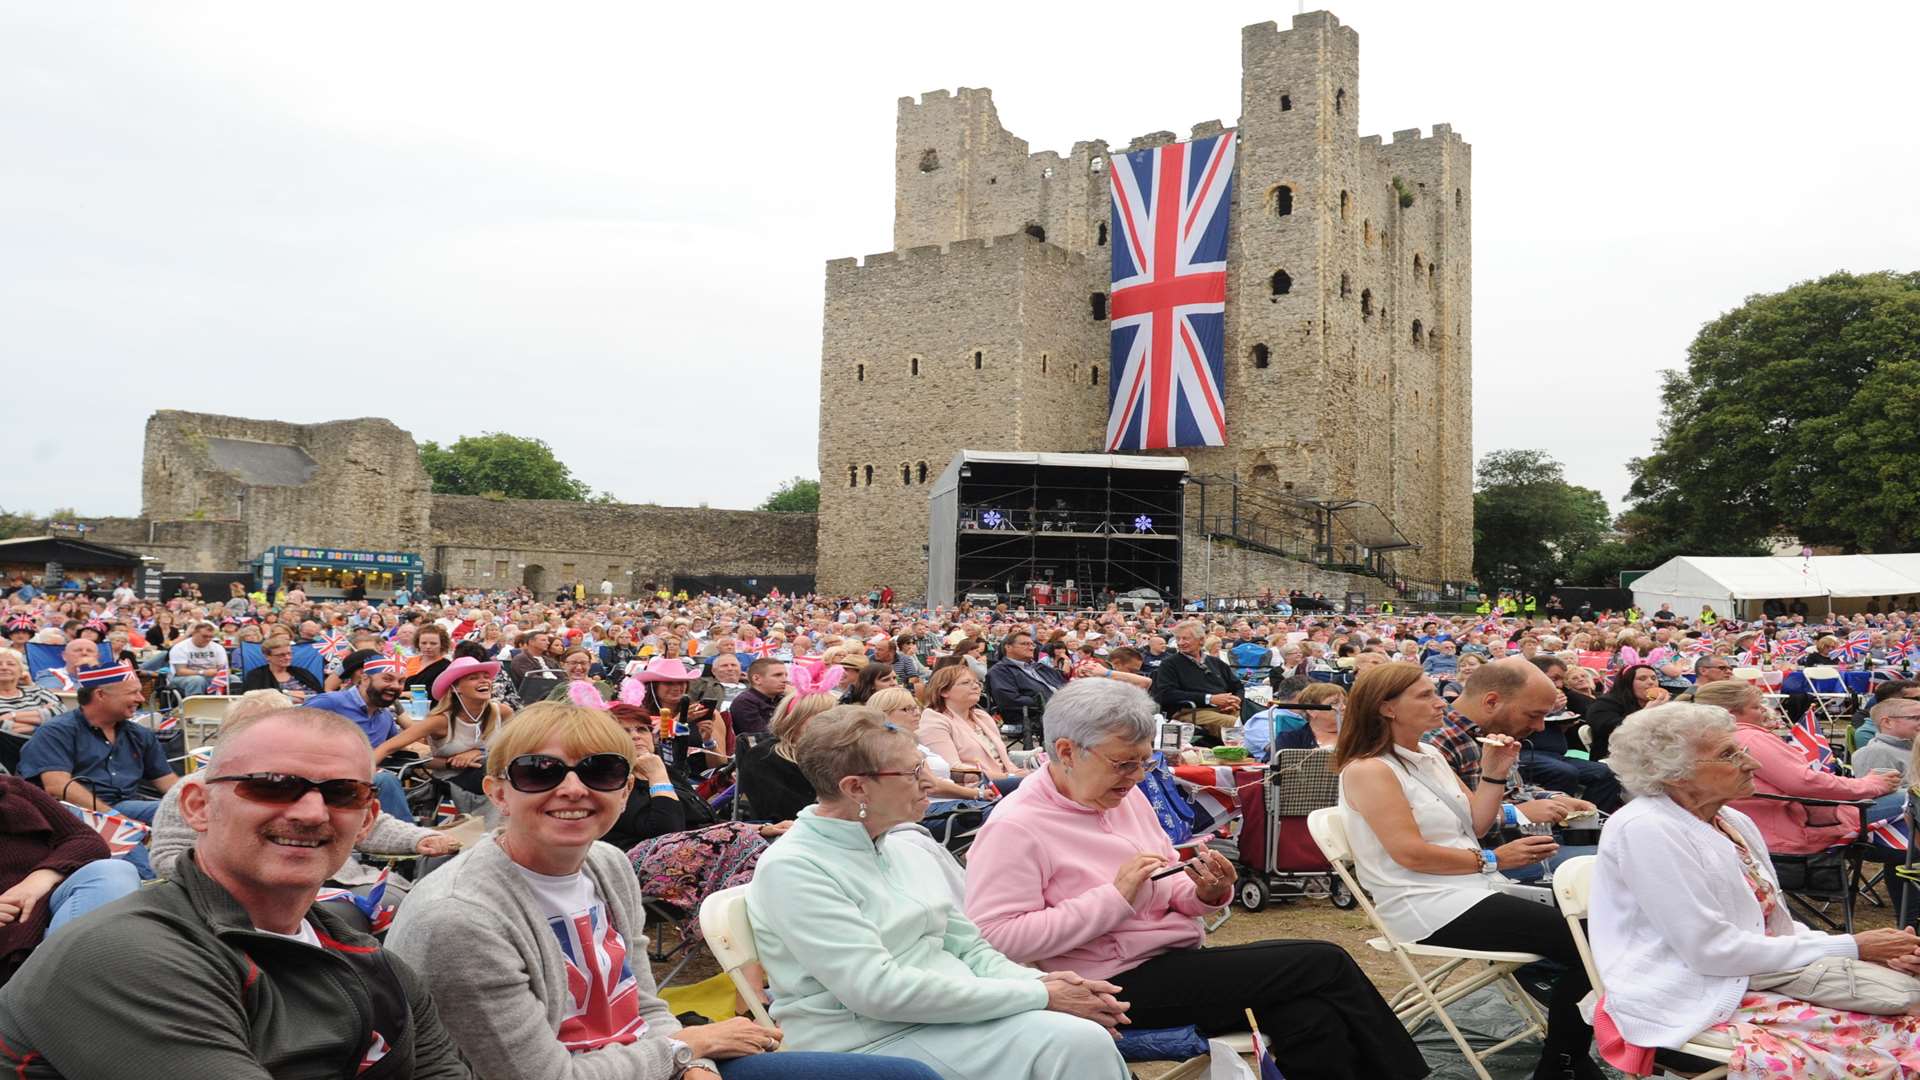 Those enjoying the Proms can still bring their own glass of bubbly. Picture: Steve Crispe